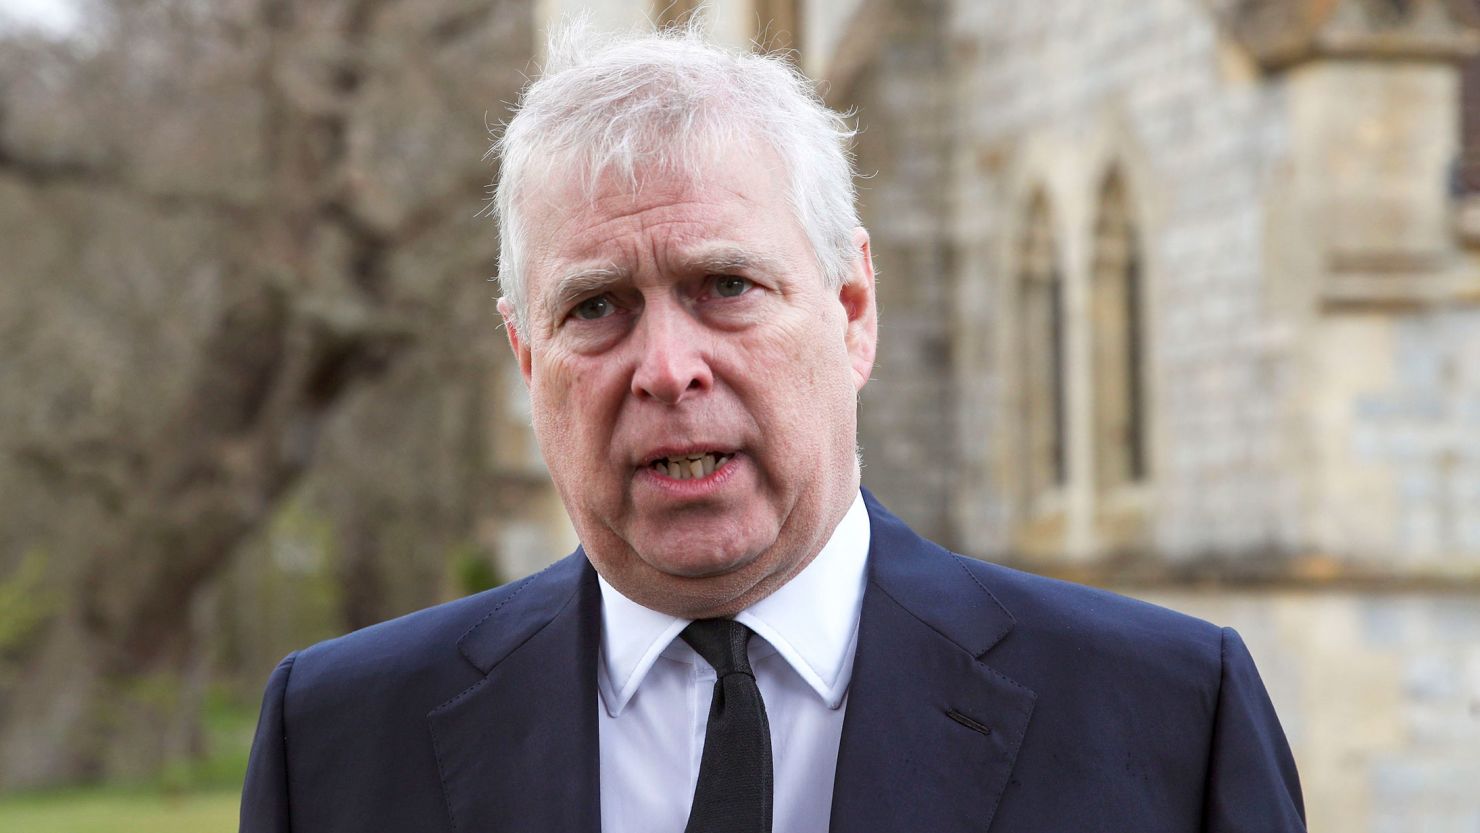 Prince Andrew's Twitter account has been deleted.